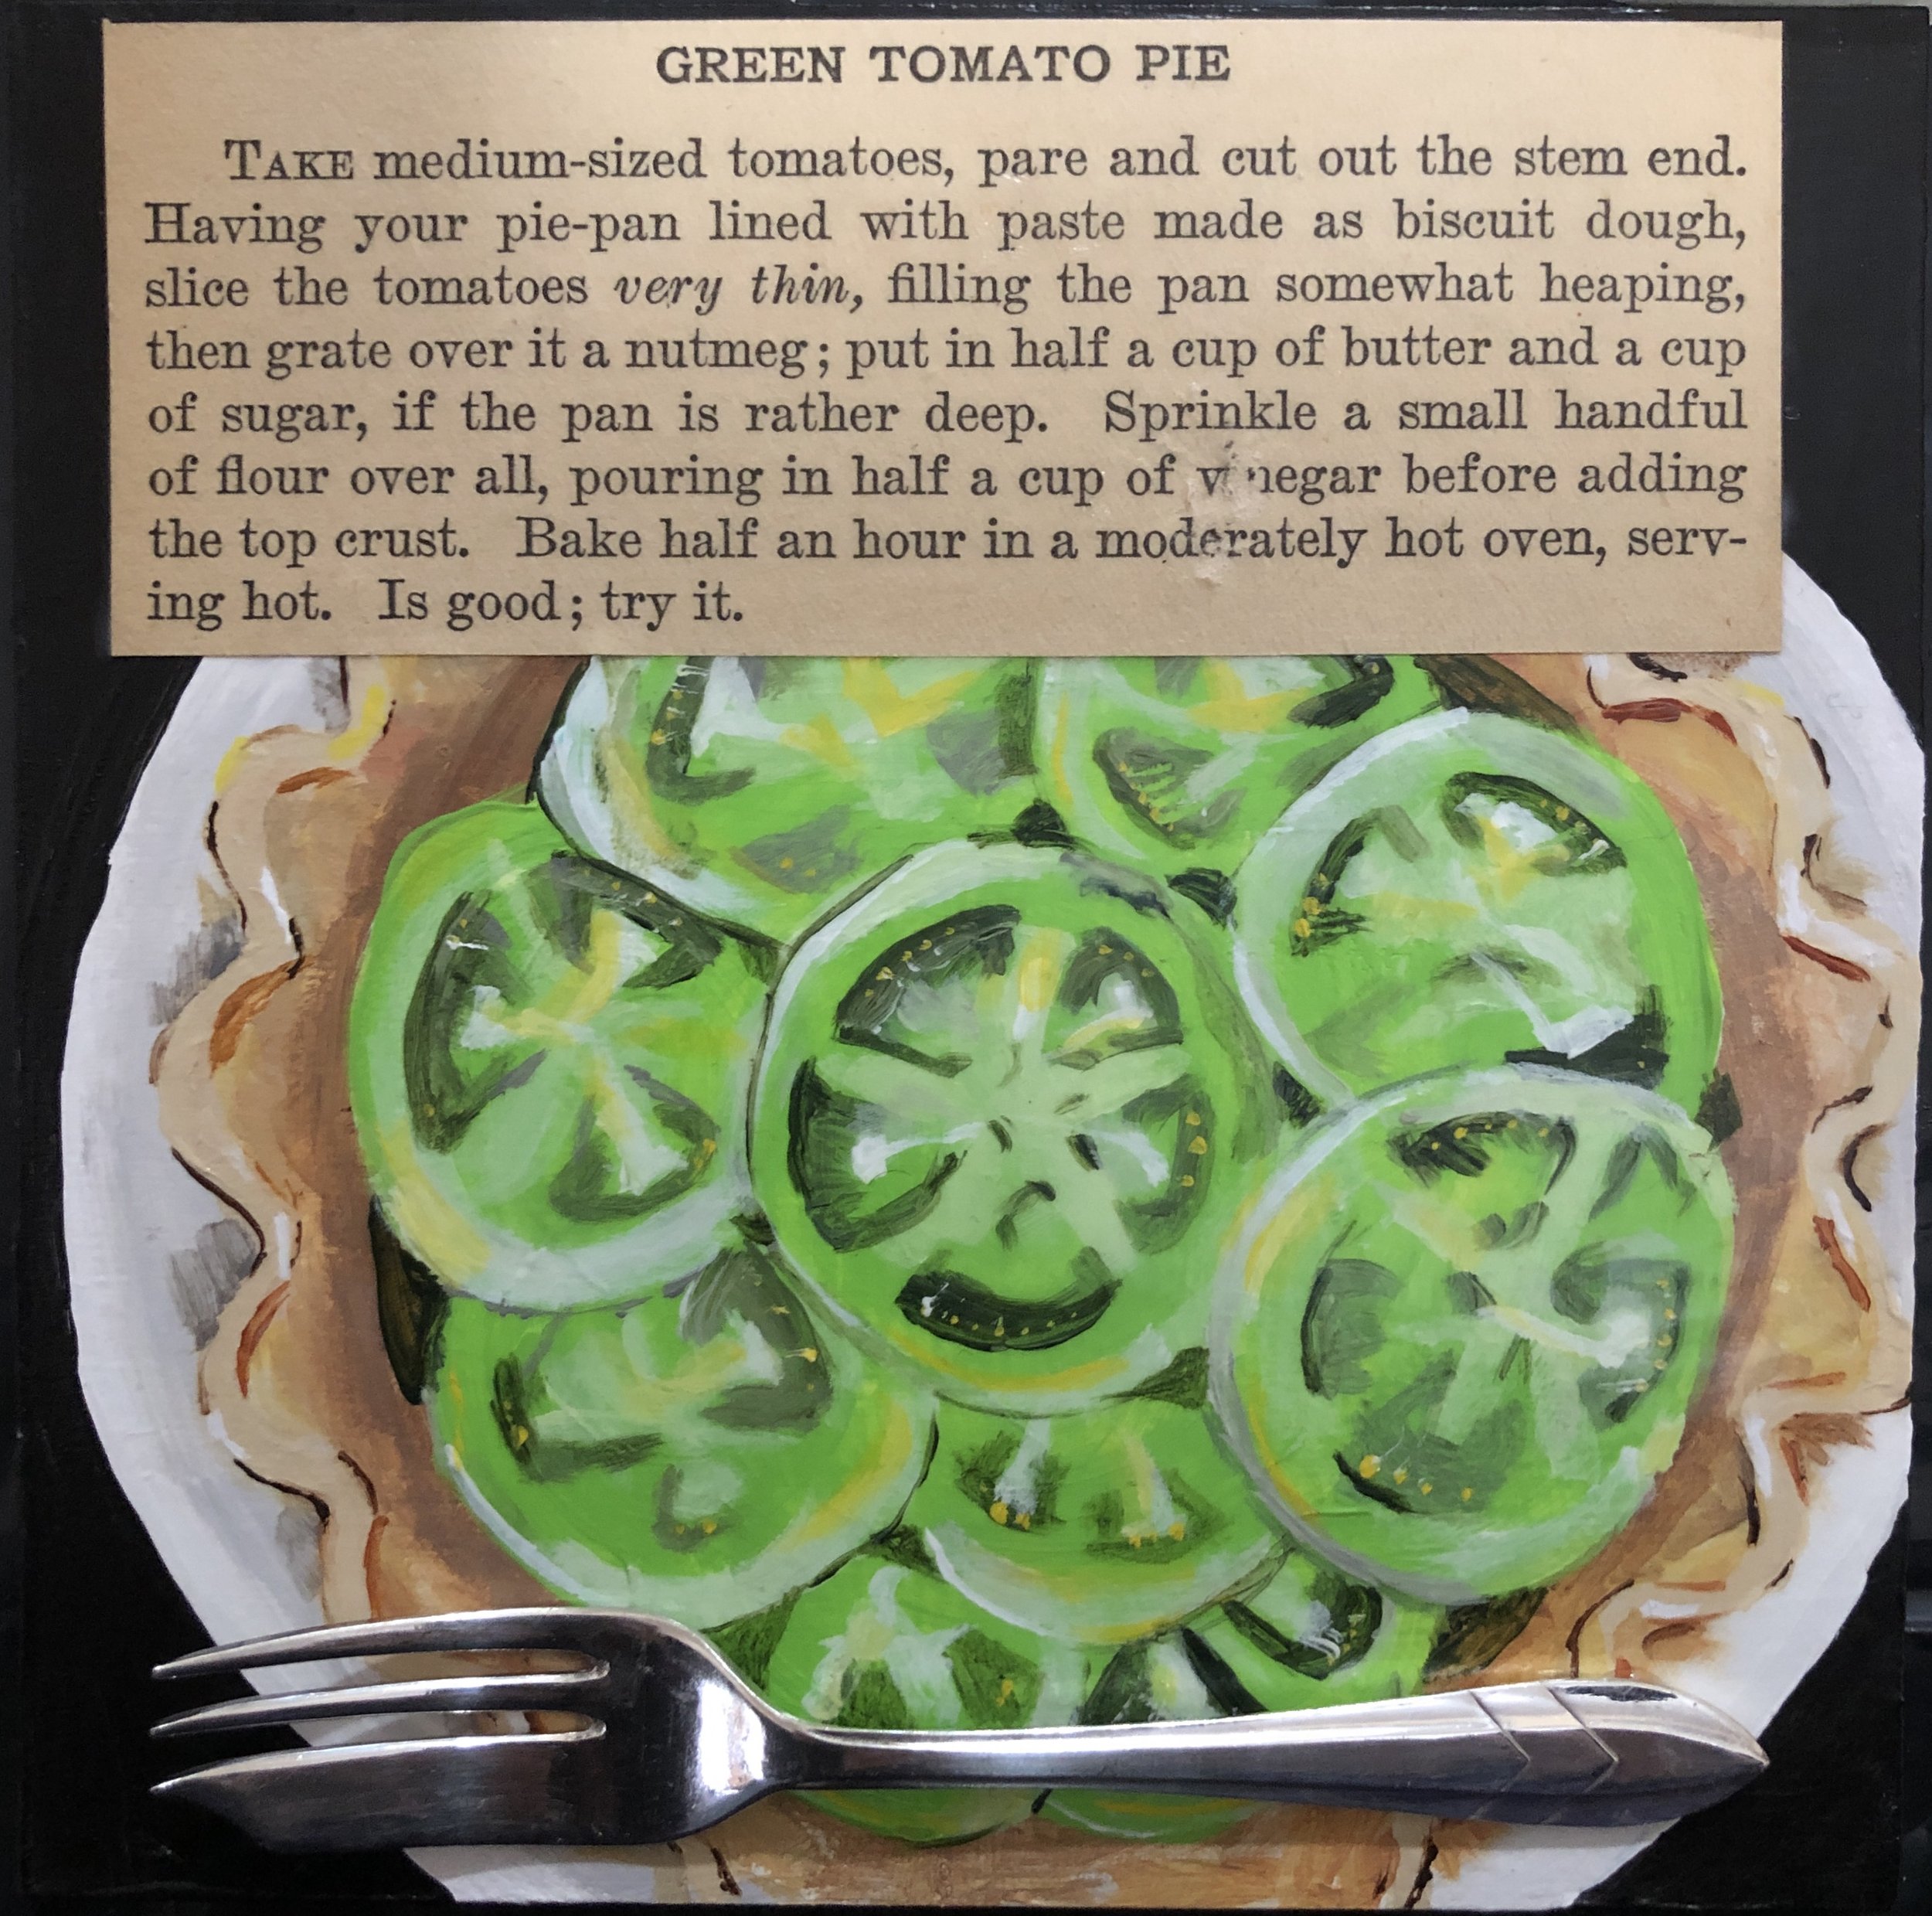 Green Tomato Pie by Carolyn Tillie